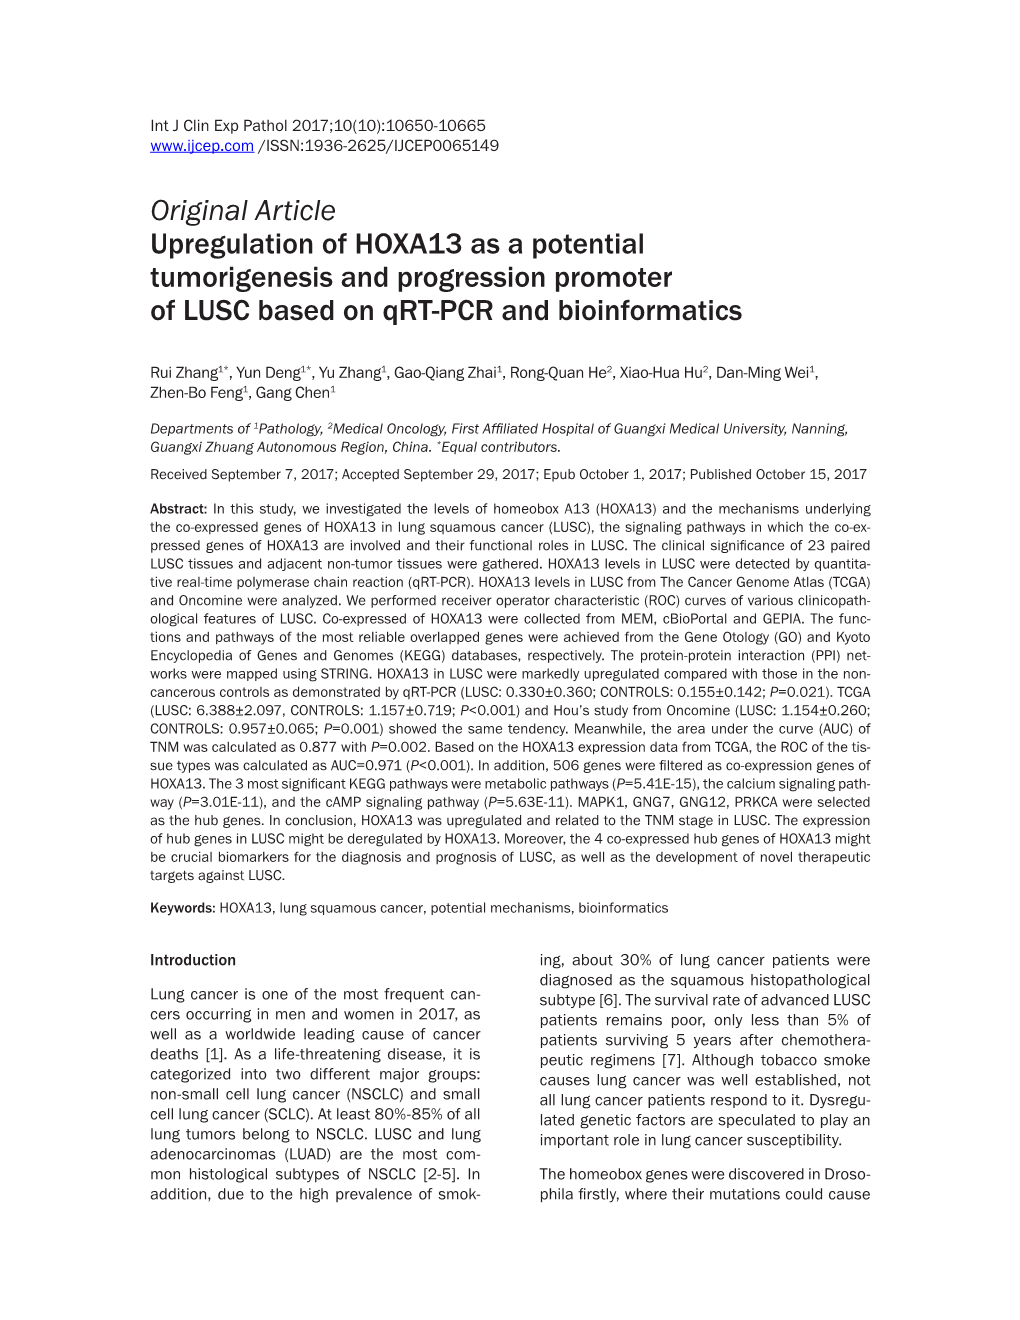 Original Article Upregulation of HOXA13 As a Potential Tumorigenesis and Progression Promoter of LUSC Based on Qrt-PCR and Bioinformatics